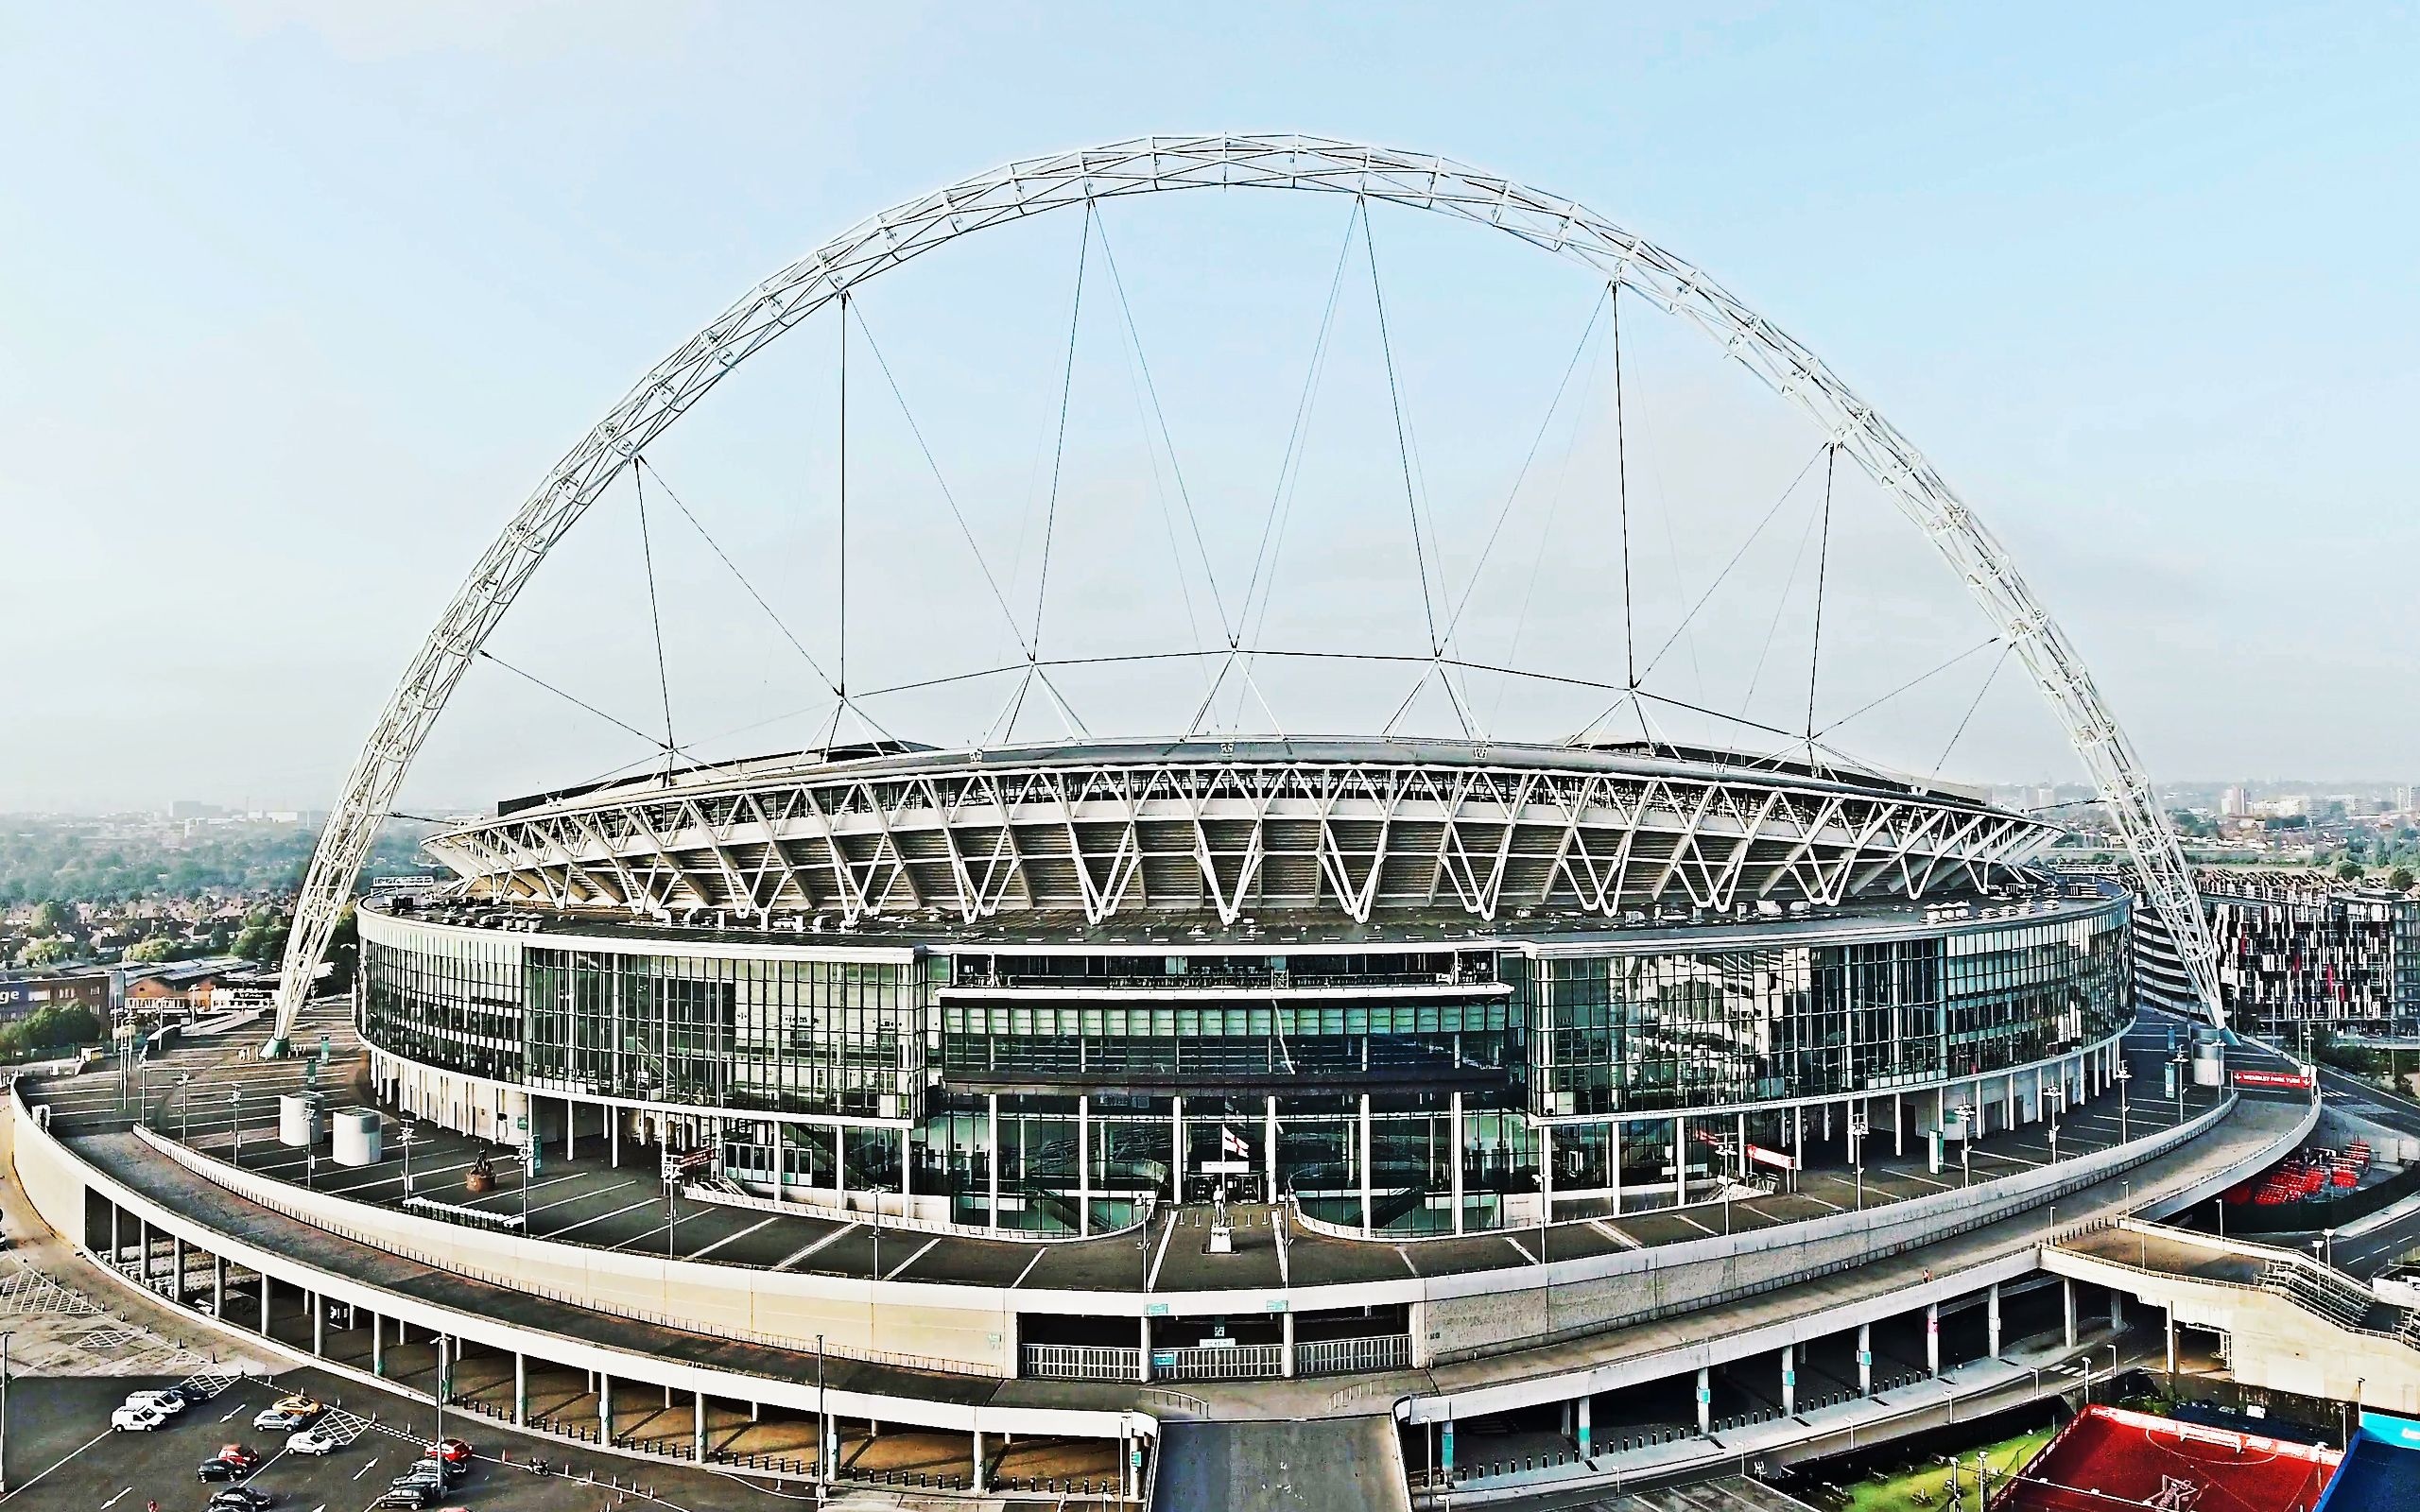 Wembley Stadium: One of the Largest stadiums in Europe, 90,000 seats. 2560x1600 HD Wallpaper.